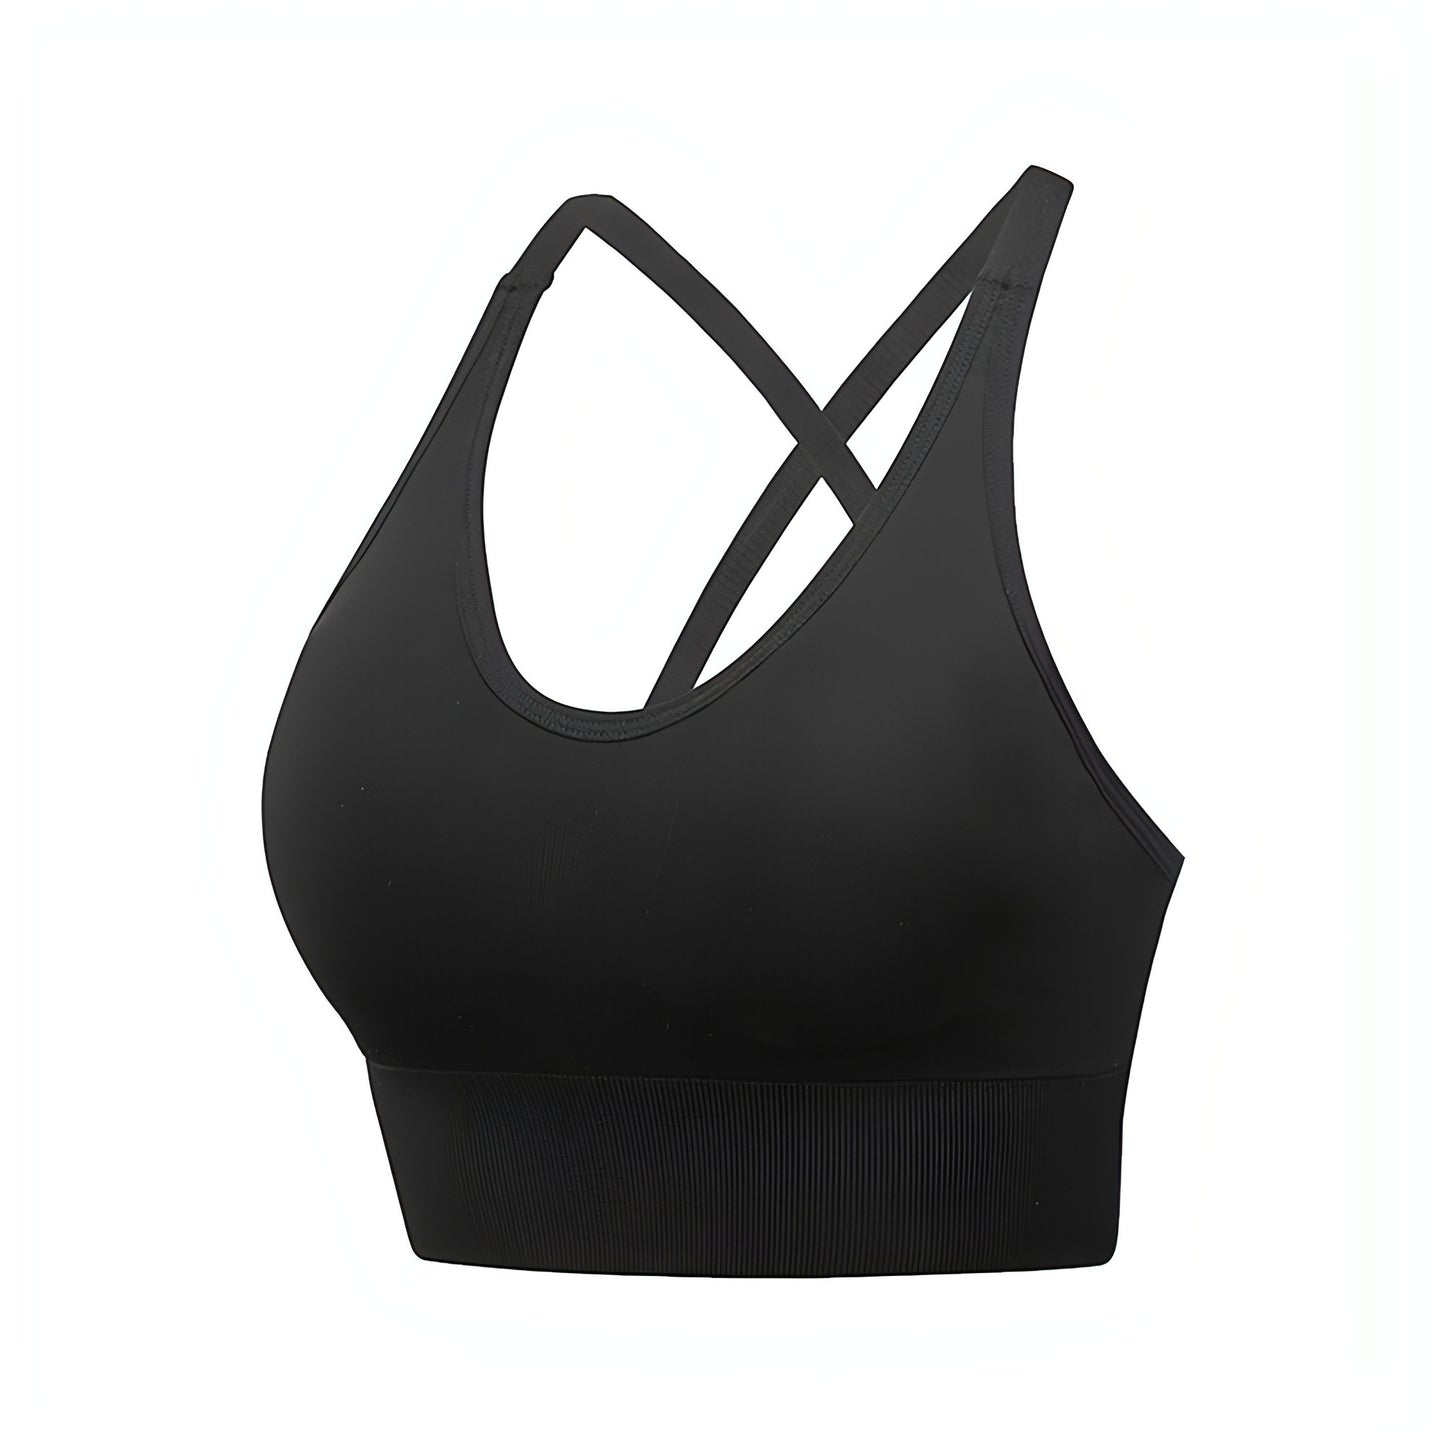 Women's Double Shoulder Strap Sports Bras Medium Impact Support Padded - Allure SocietyActivewear Tops